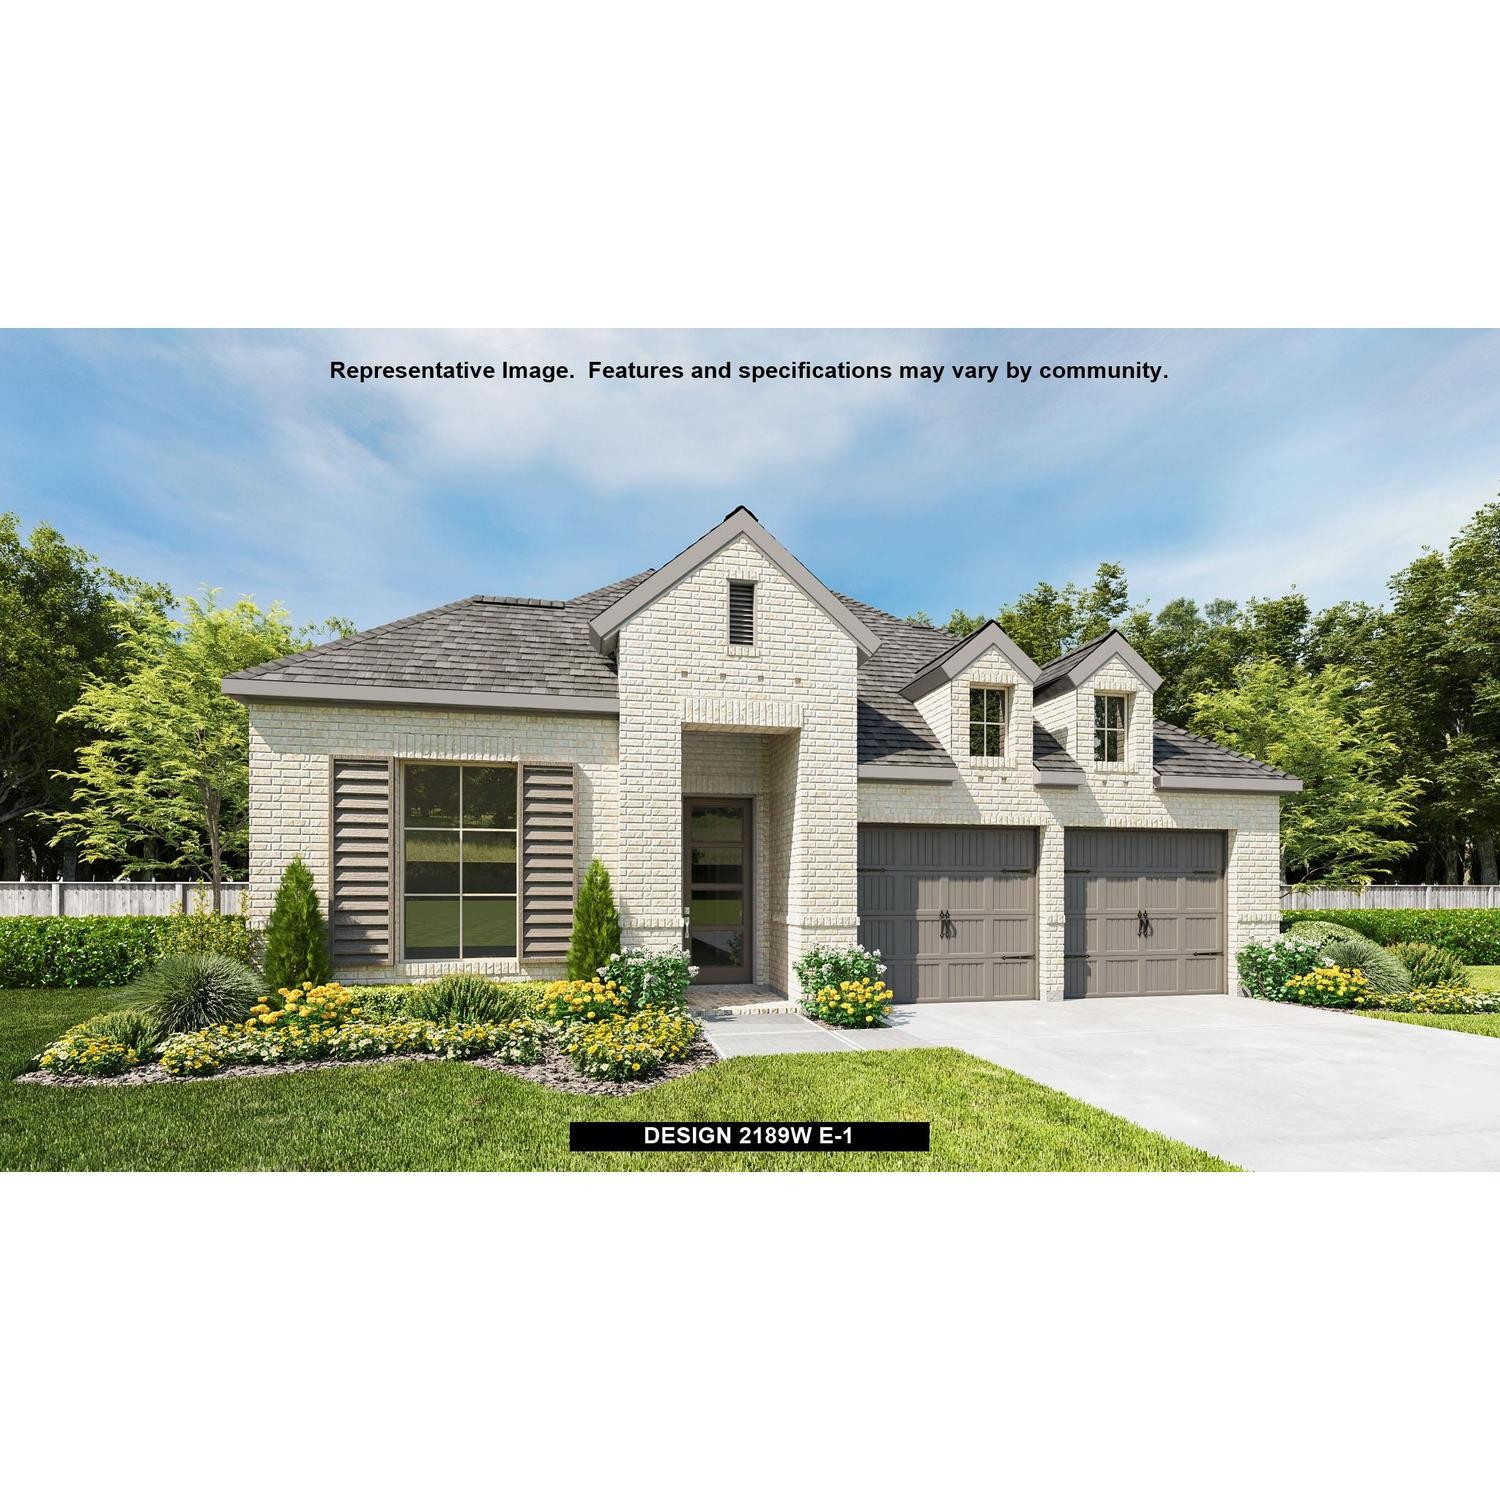 1. 13087 Soaring Forest Drive